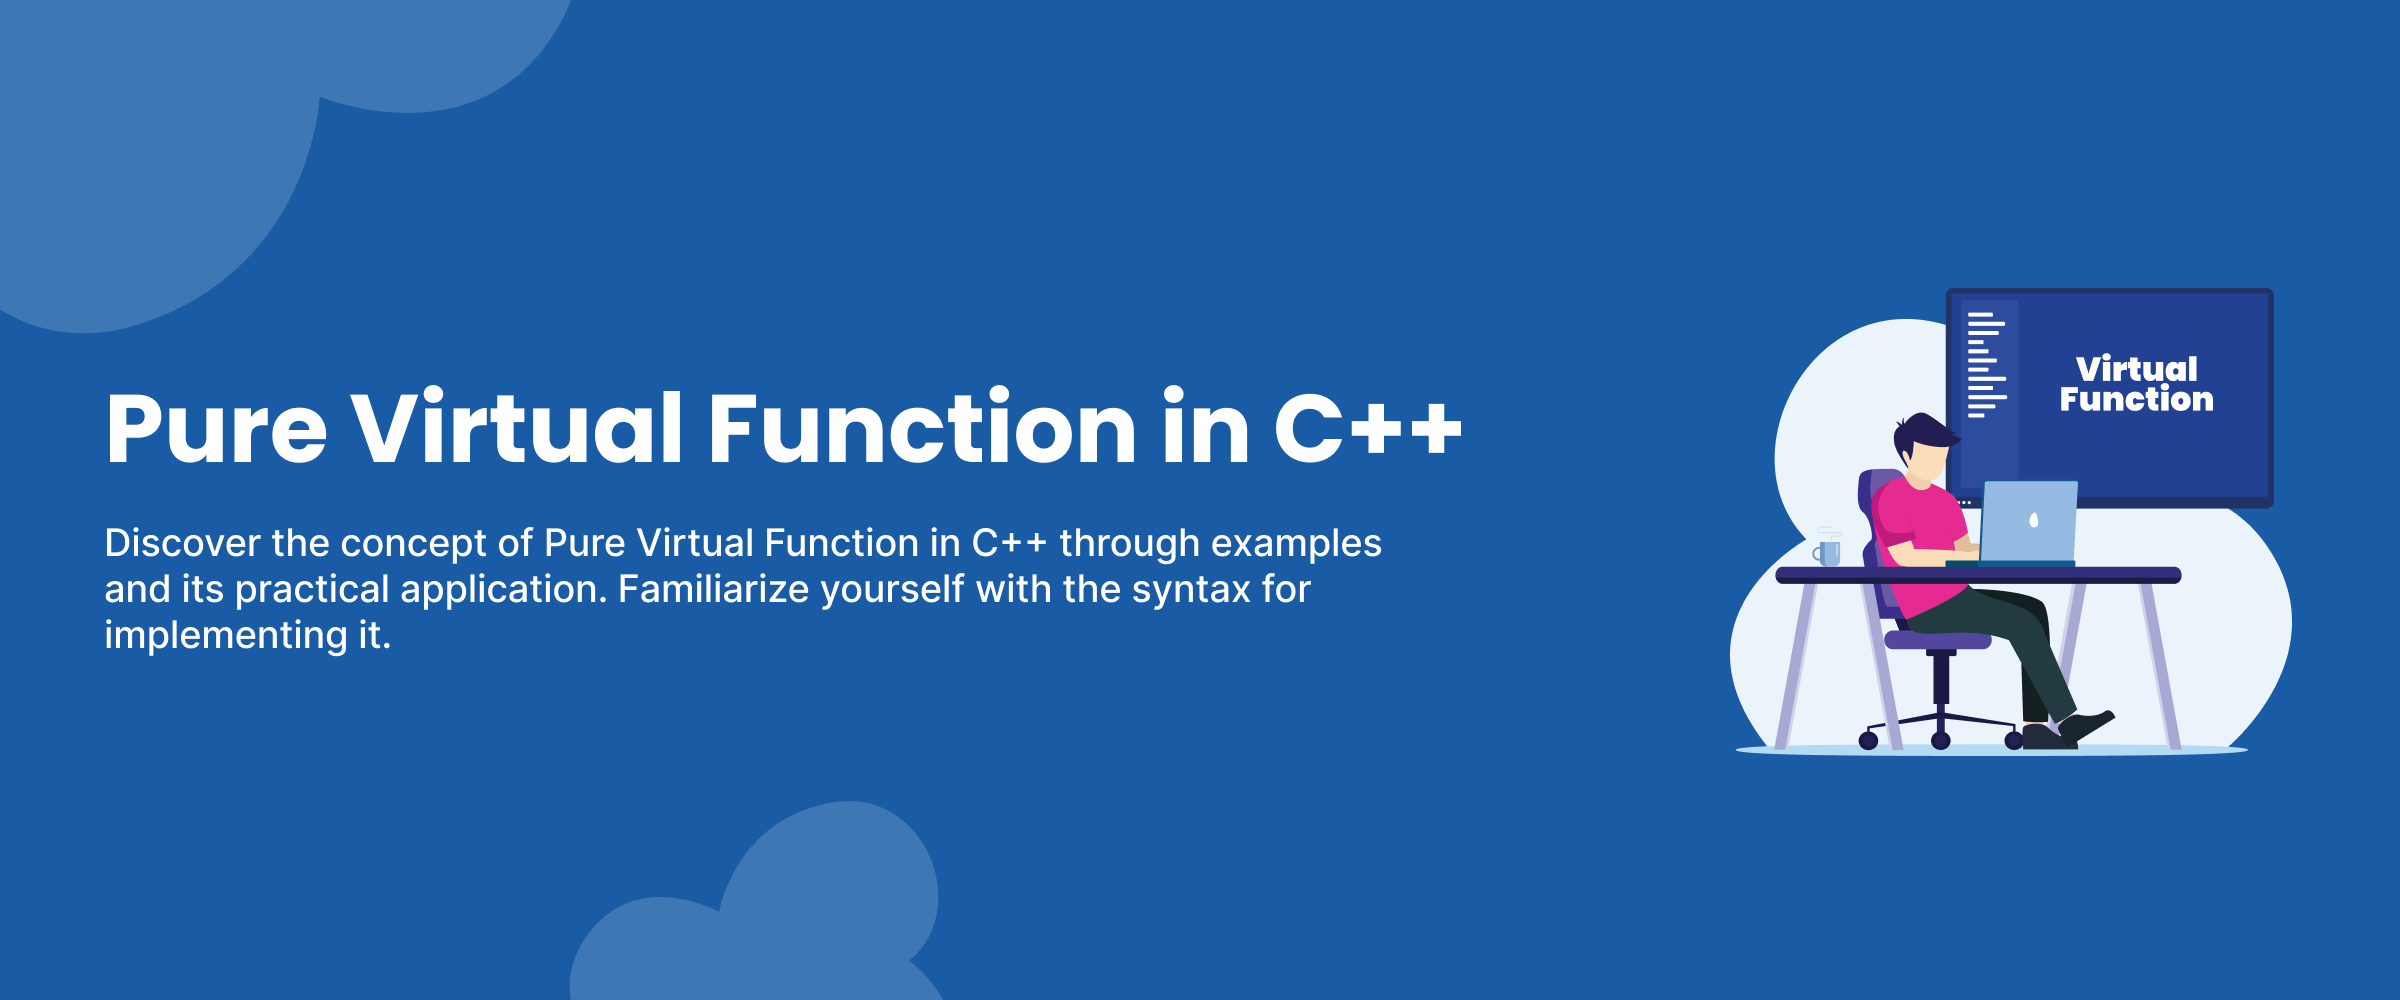 what is pure virtual function